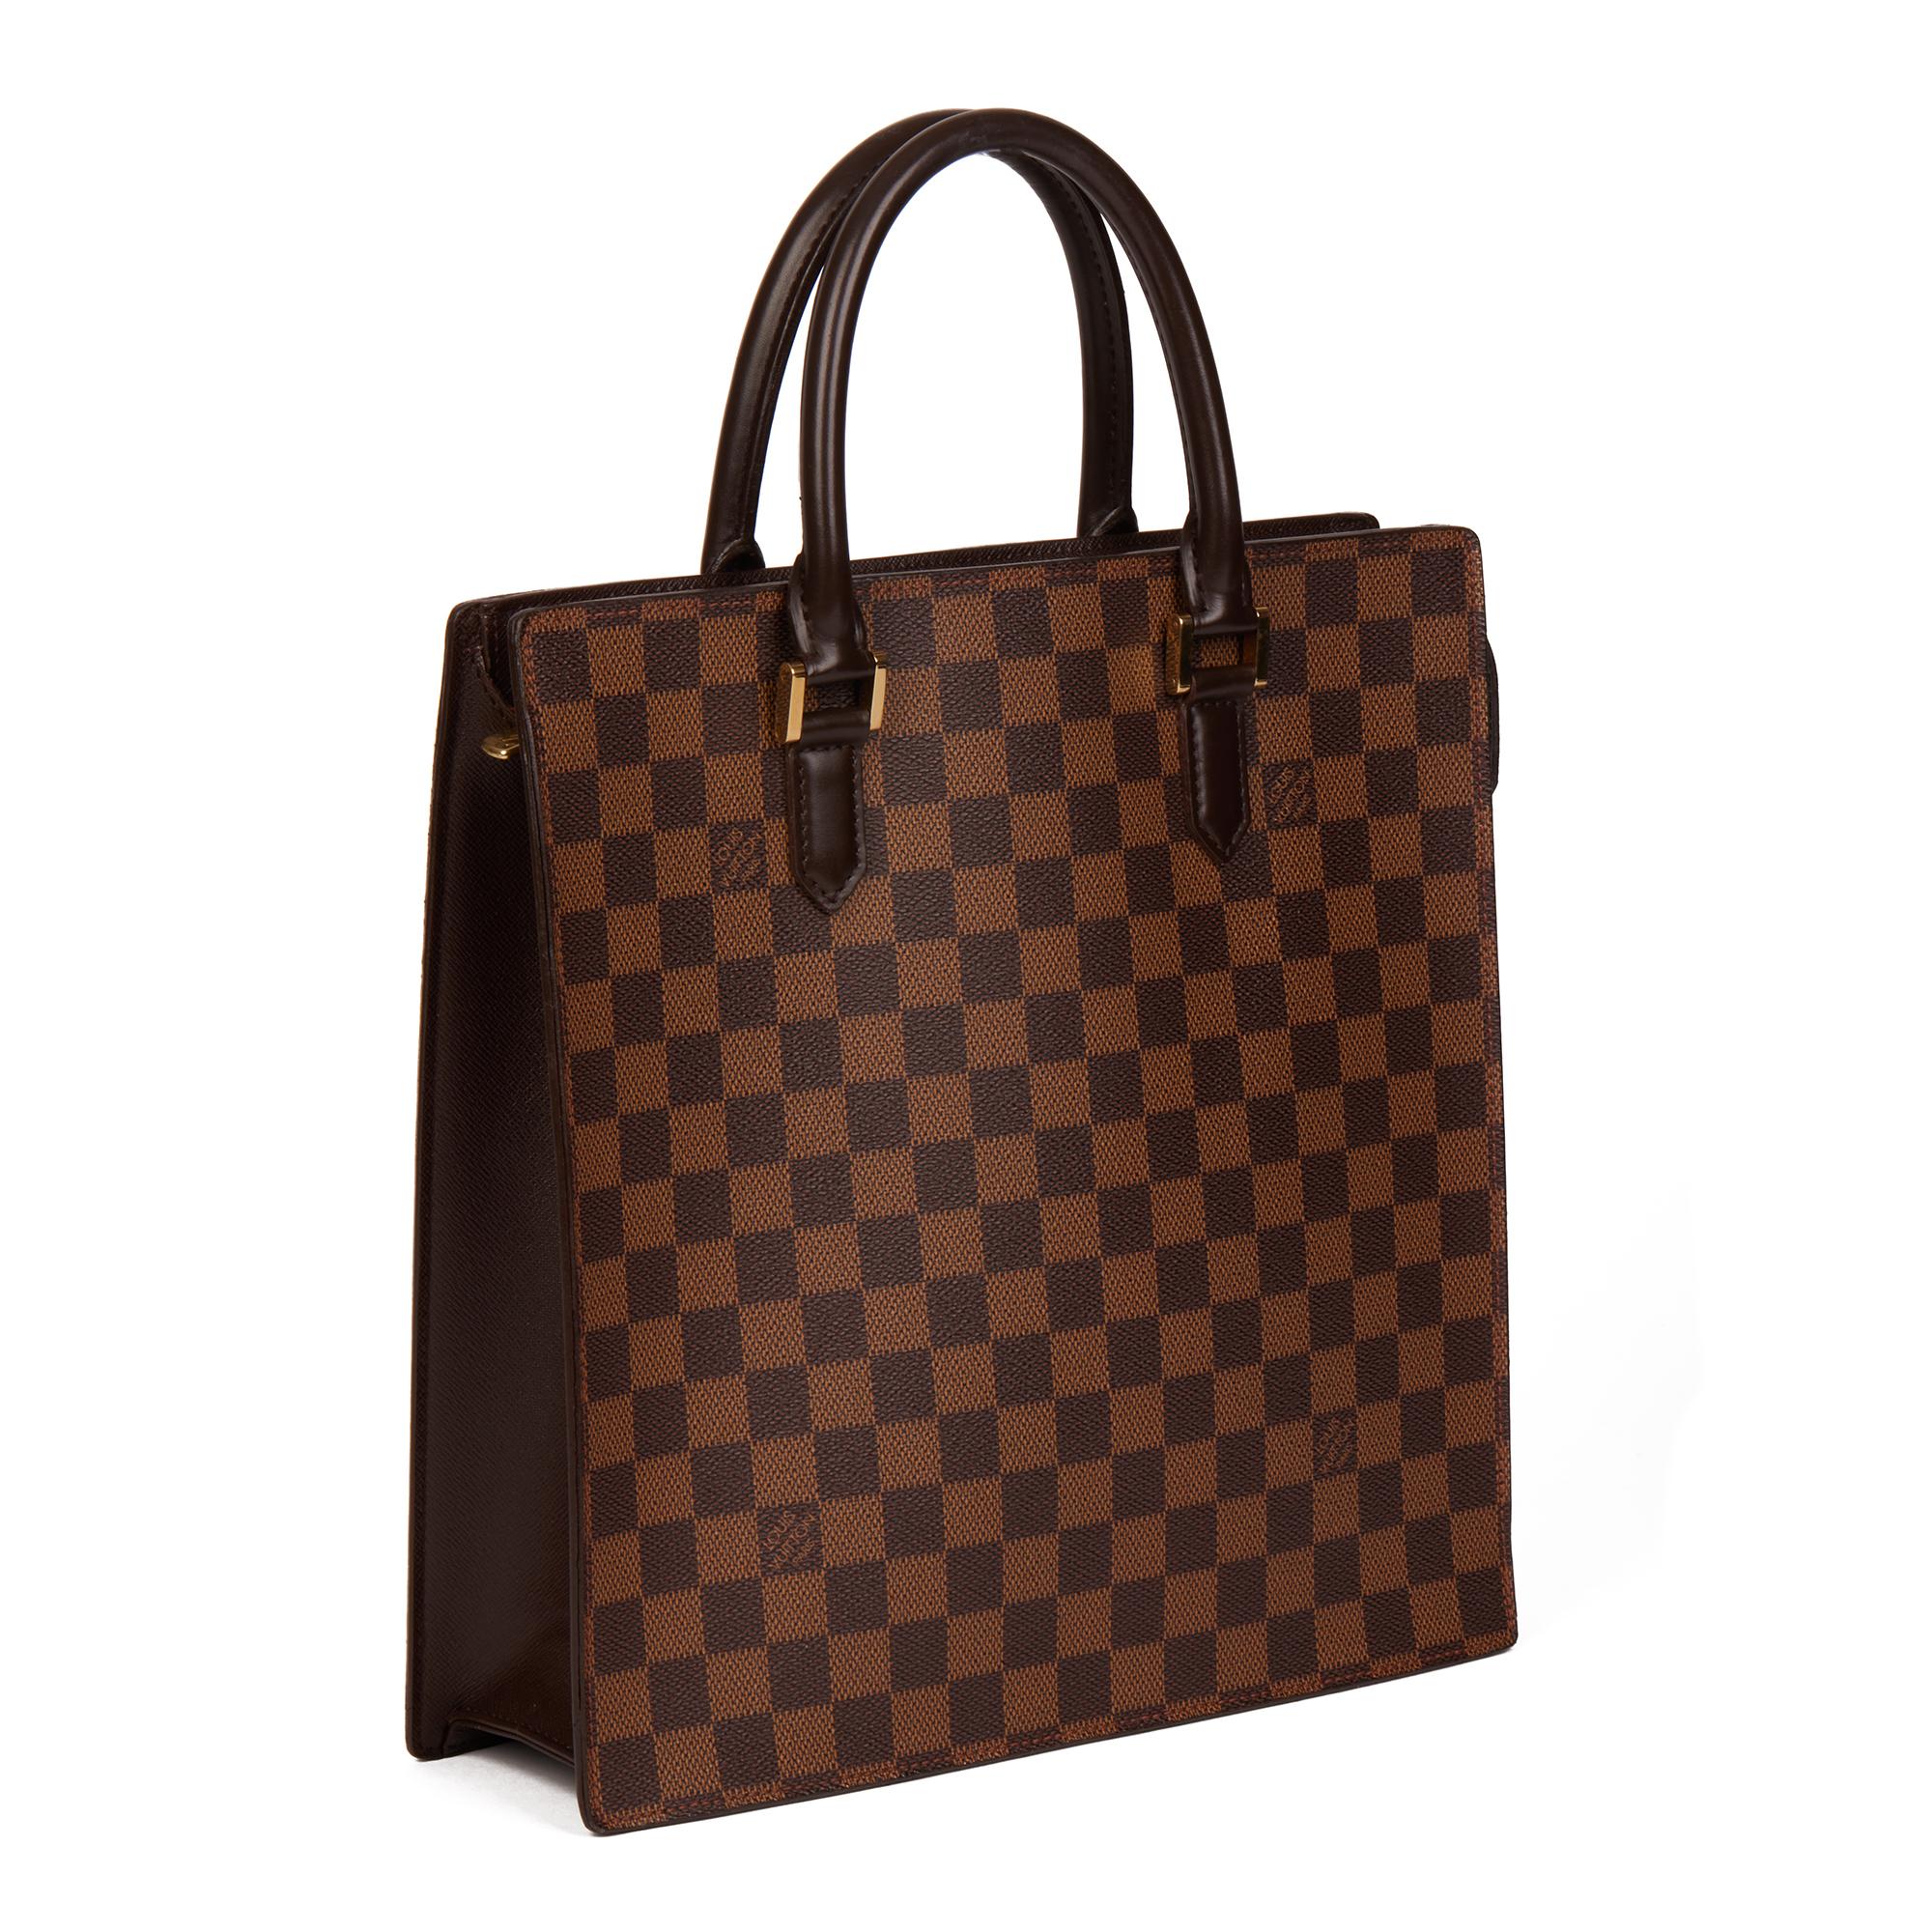 LOUIS VUITTON
Brown Coated Canvas Damier Ebene and Brown Calf Leather Venice PM

Xupes Reference: HB4351
Serial Number: MI 1927
Age (Circa): 1997
Authenticity Details: Date Stamp (Made in France) 
Gender: Ladies
Type: Tote

Colour: Brown
Hardware: